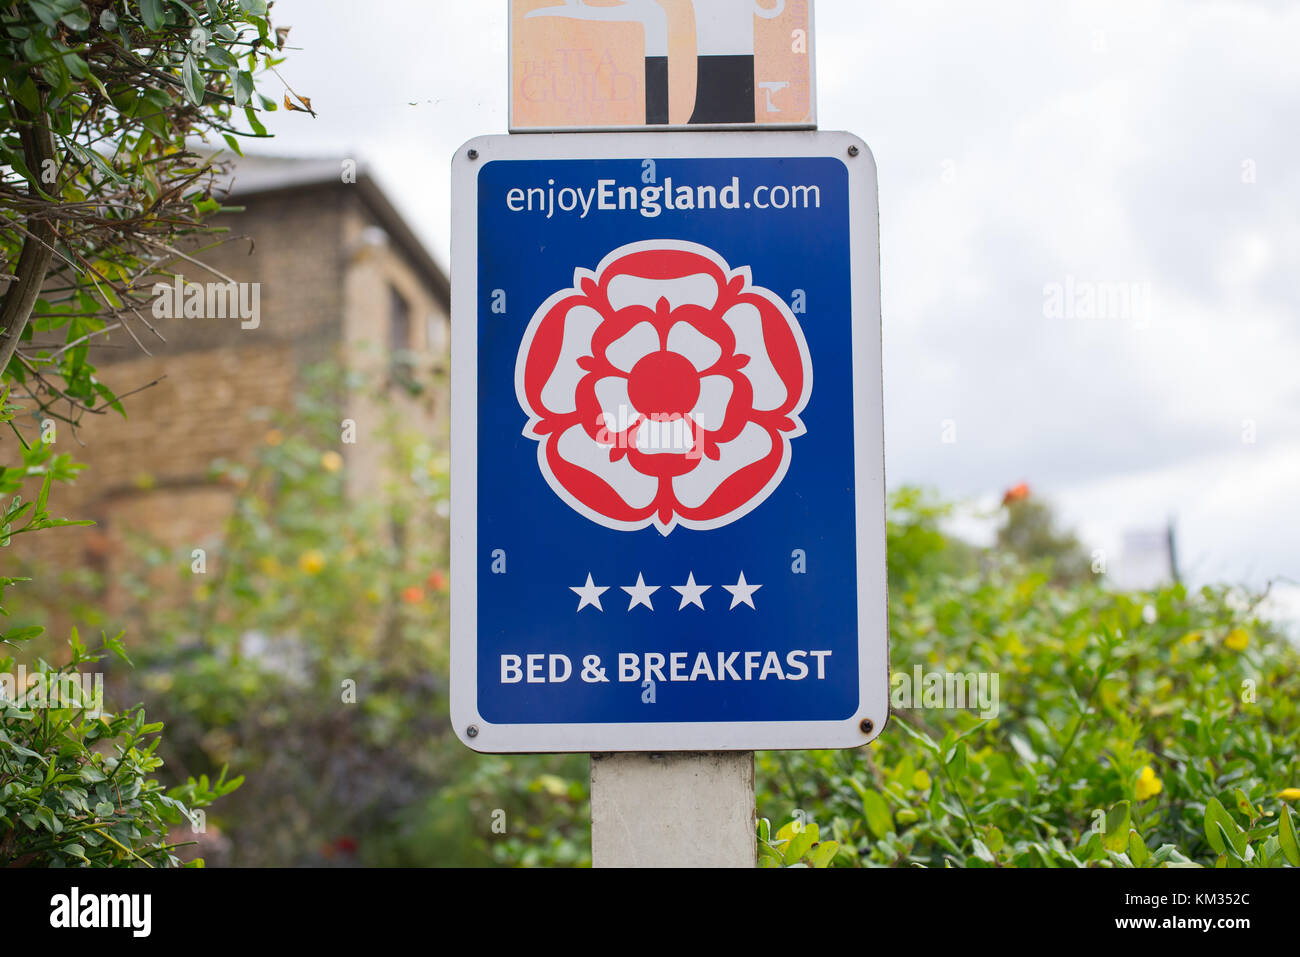 Bed and breakfast segno indicante la sua appartenenza a godere england.com, Inghilterra star-rated Guest accommodation Foto Stock